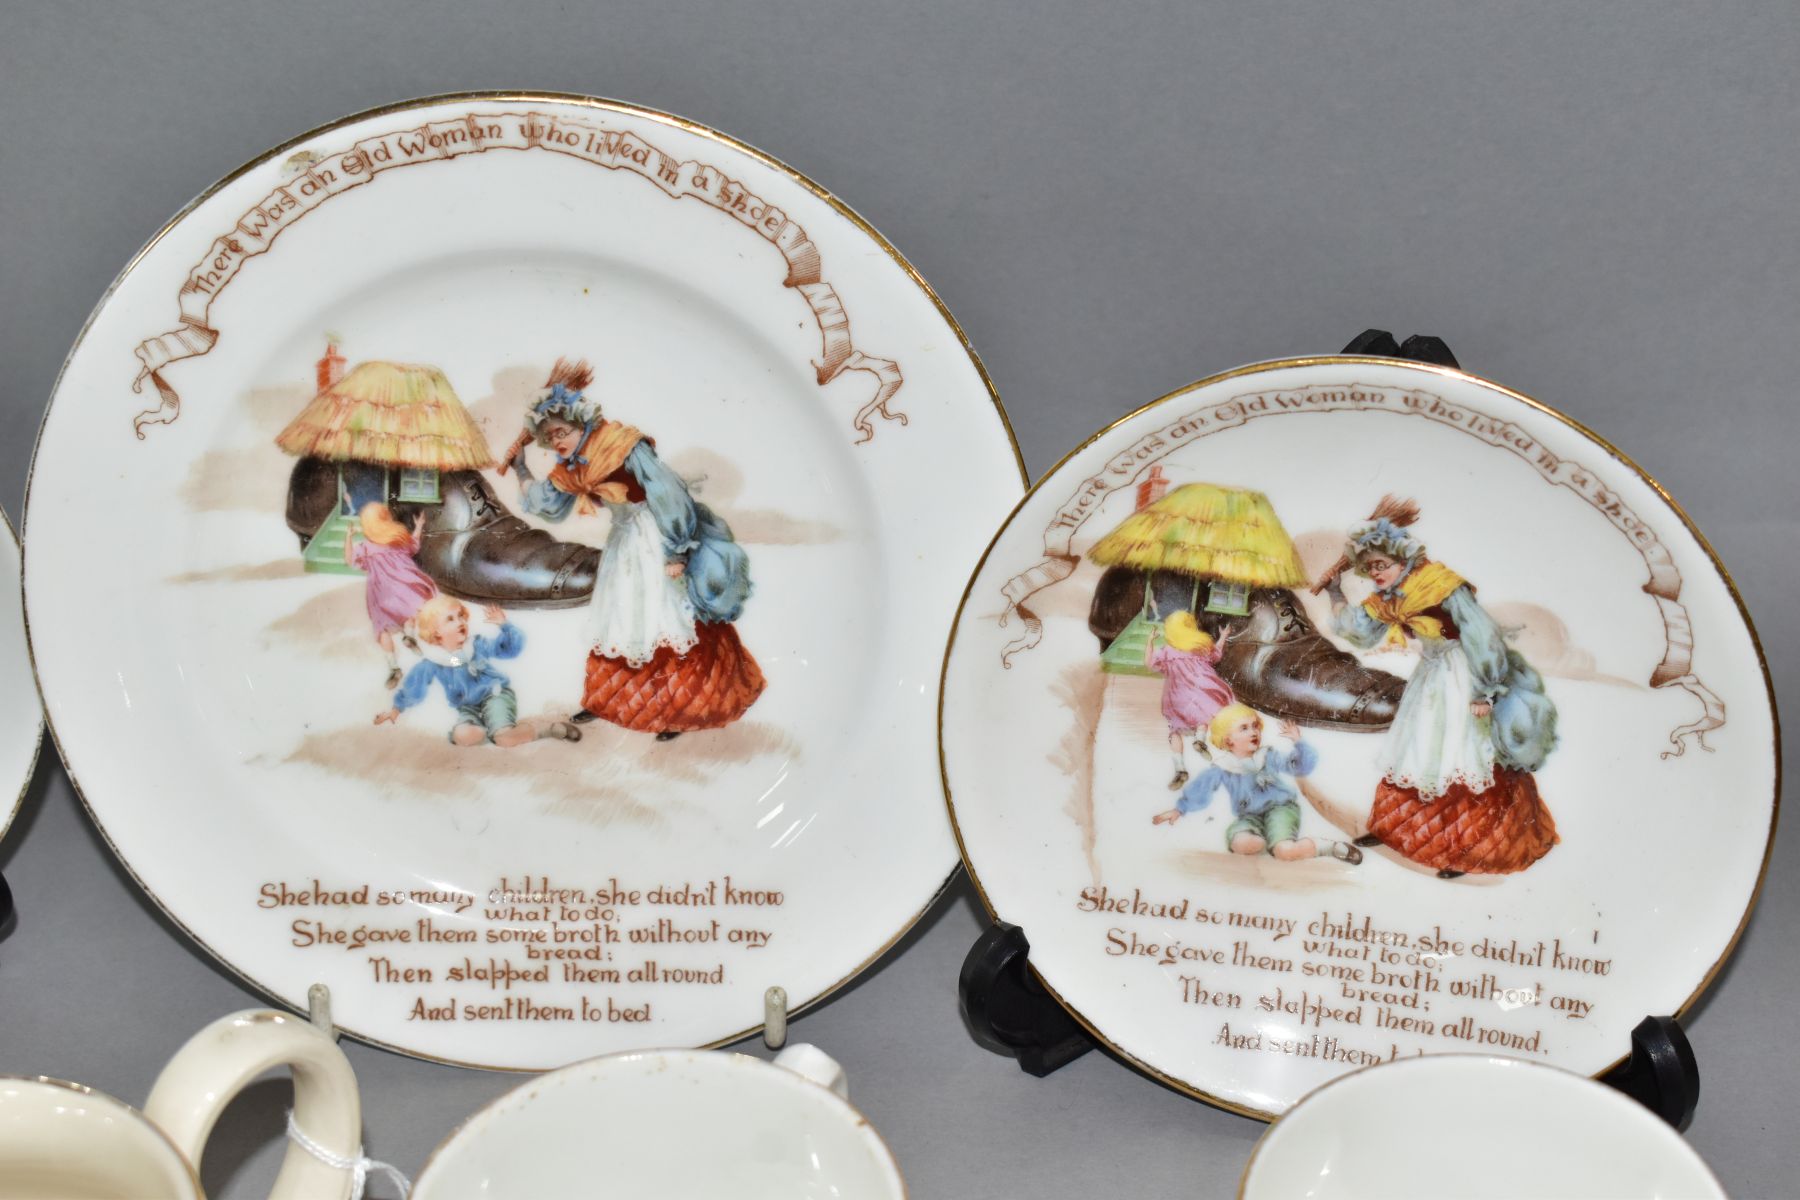 SIX PIECES OF ROYAL DOULTON NURSERY RHYMES 'A' SERIES WARE, DESIGNED BY WILLIAM SAVAGE COOPER, ' - Image 6 of 10